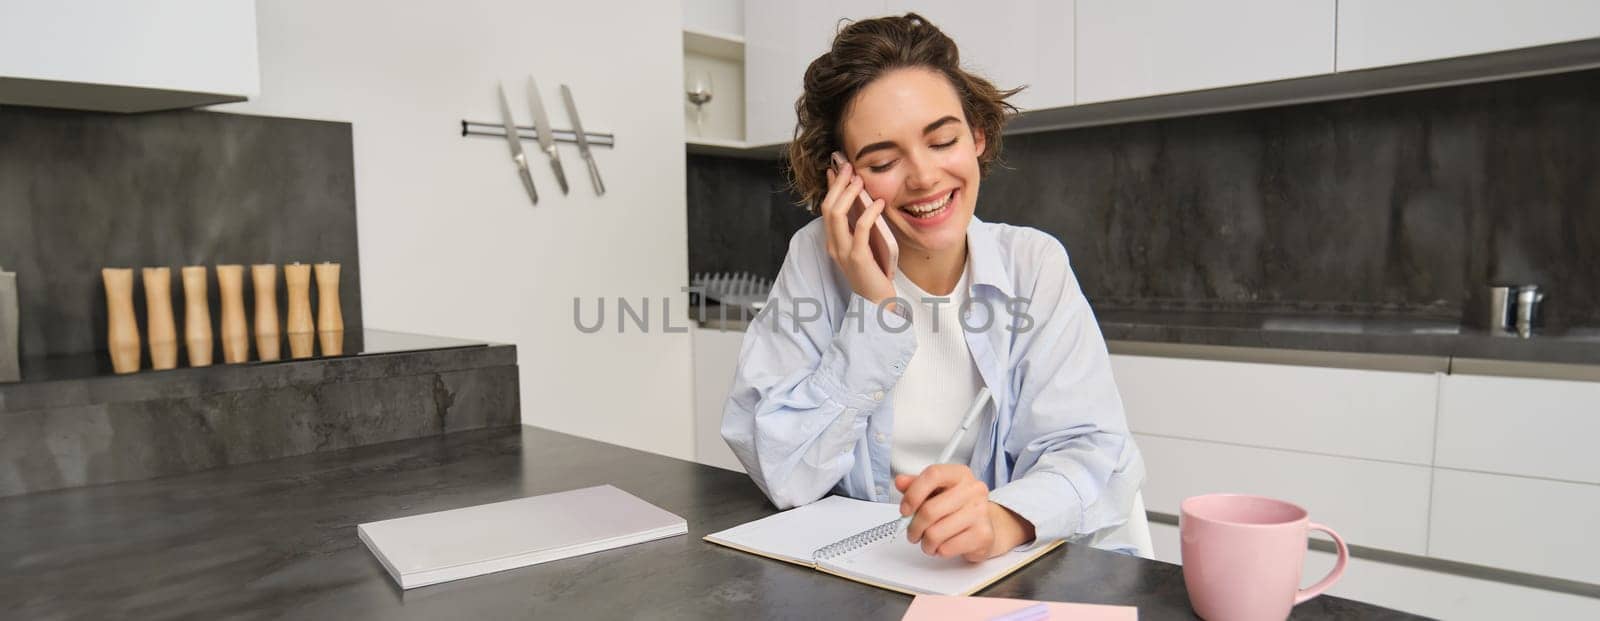 Image of woman working from home, writing down information during a phone call, calling someone, using smartphone.